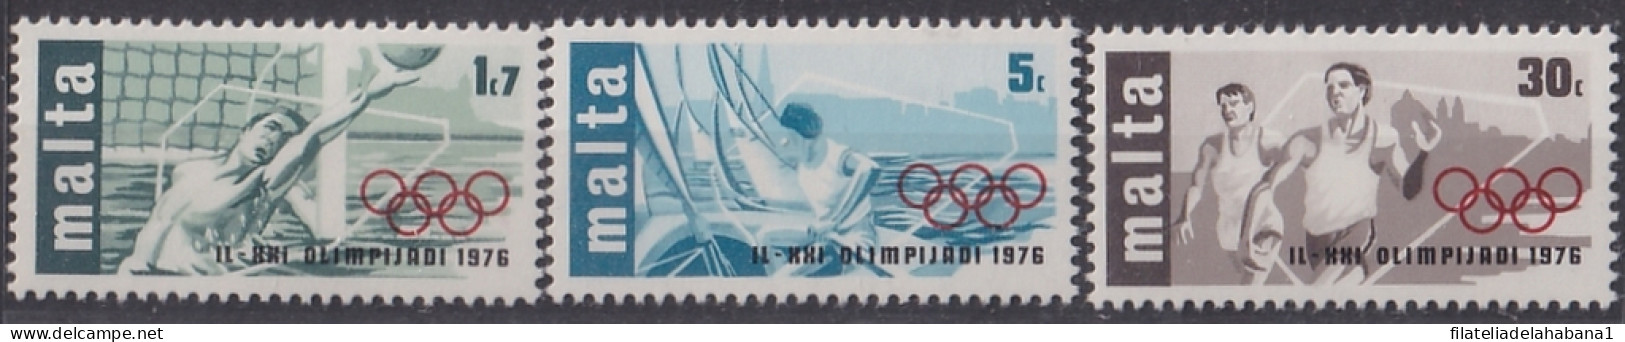 F-EX47597 MALTA MNH 1976 MONTREAL OLYMPIC GAMES ATHLETISM YACHTING WATERPOLO.  - Zomer 1976: Montreal